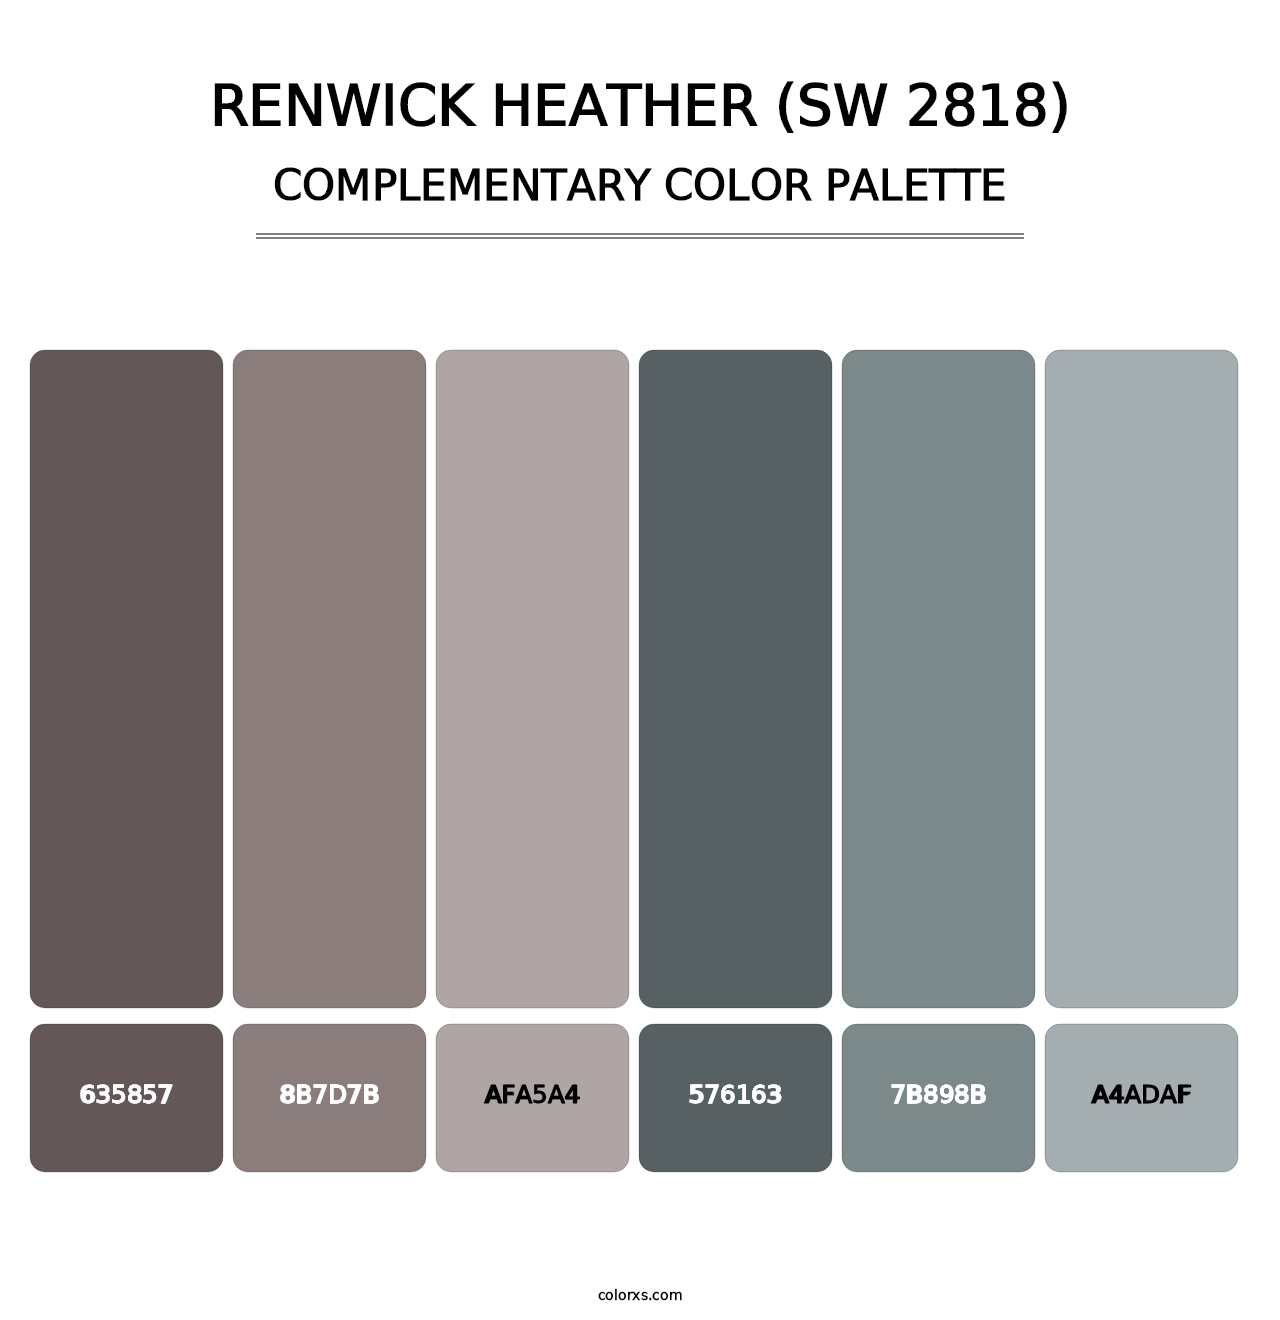 Renwick Heather (SW 2818) - Complementary Color Palette